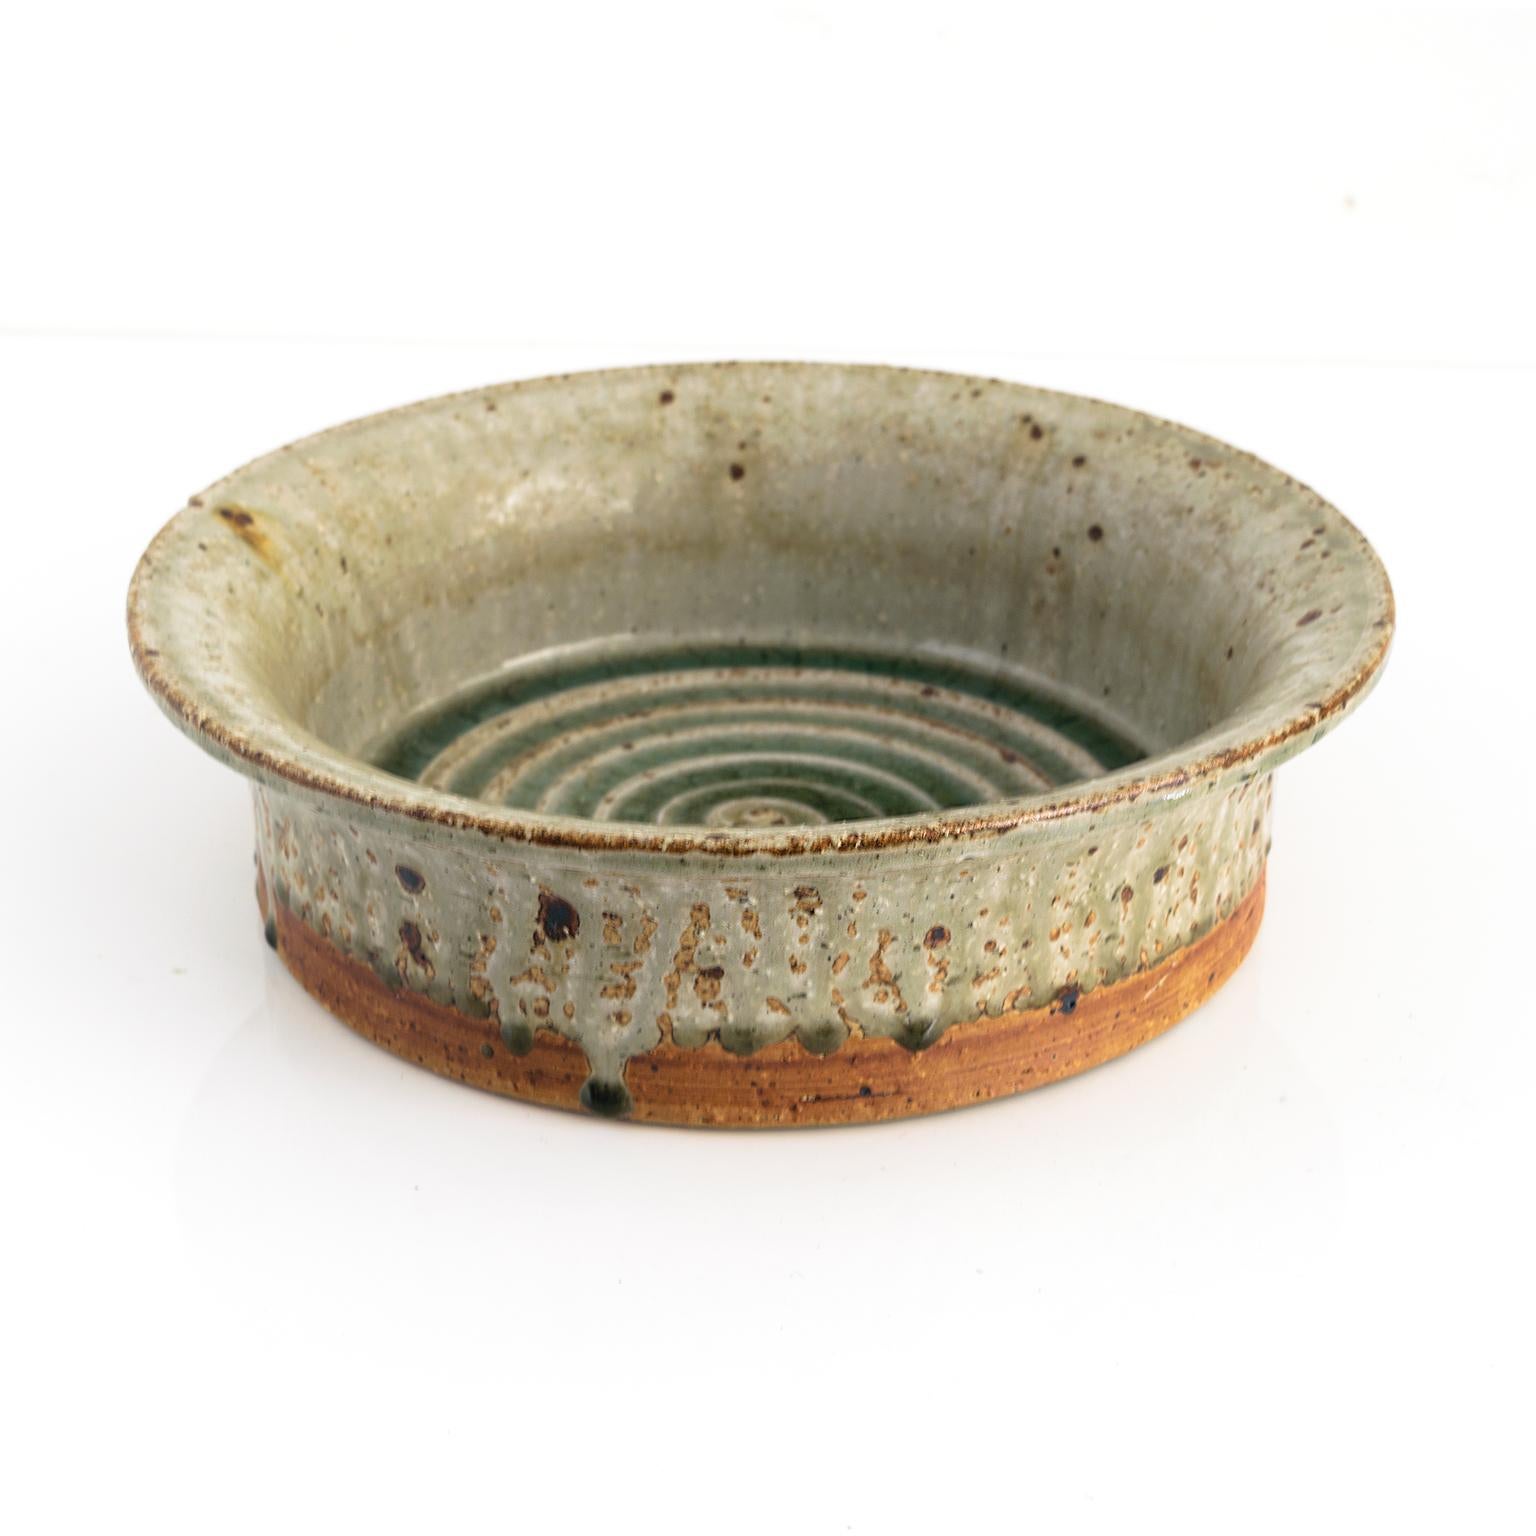 Marianne Westman hand thrown stoneware bowl with flared edge and a spiral with green glaze inside. Exterior is partially glazed and accented with a series of dripping points. Made at Rörstrand Ateljé, Sweden circa 1960, signed.

Measures: